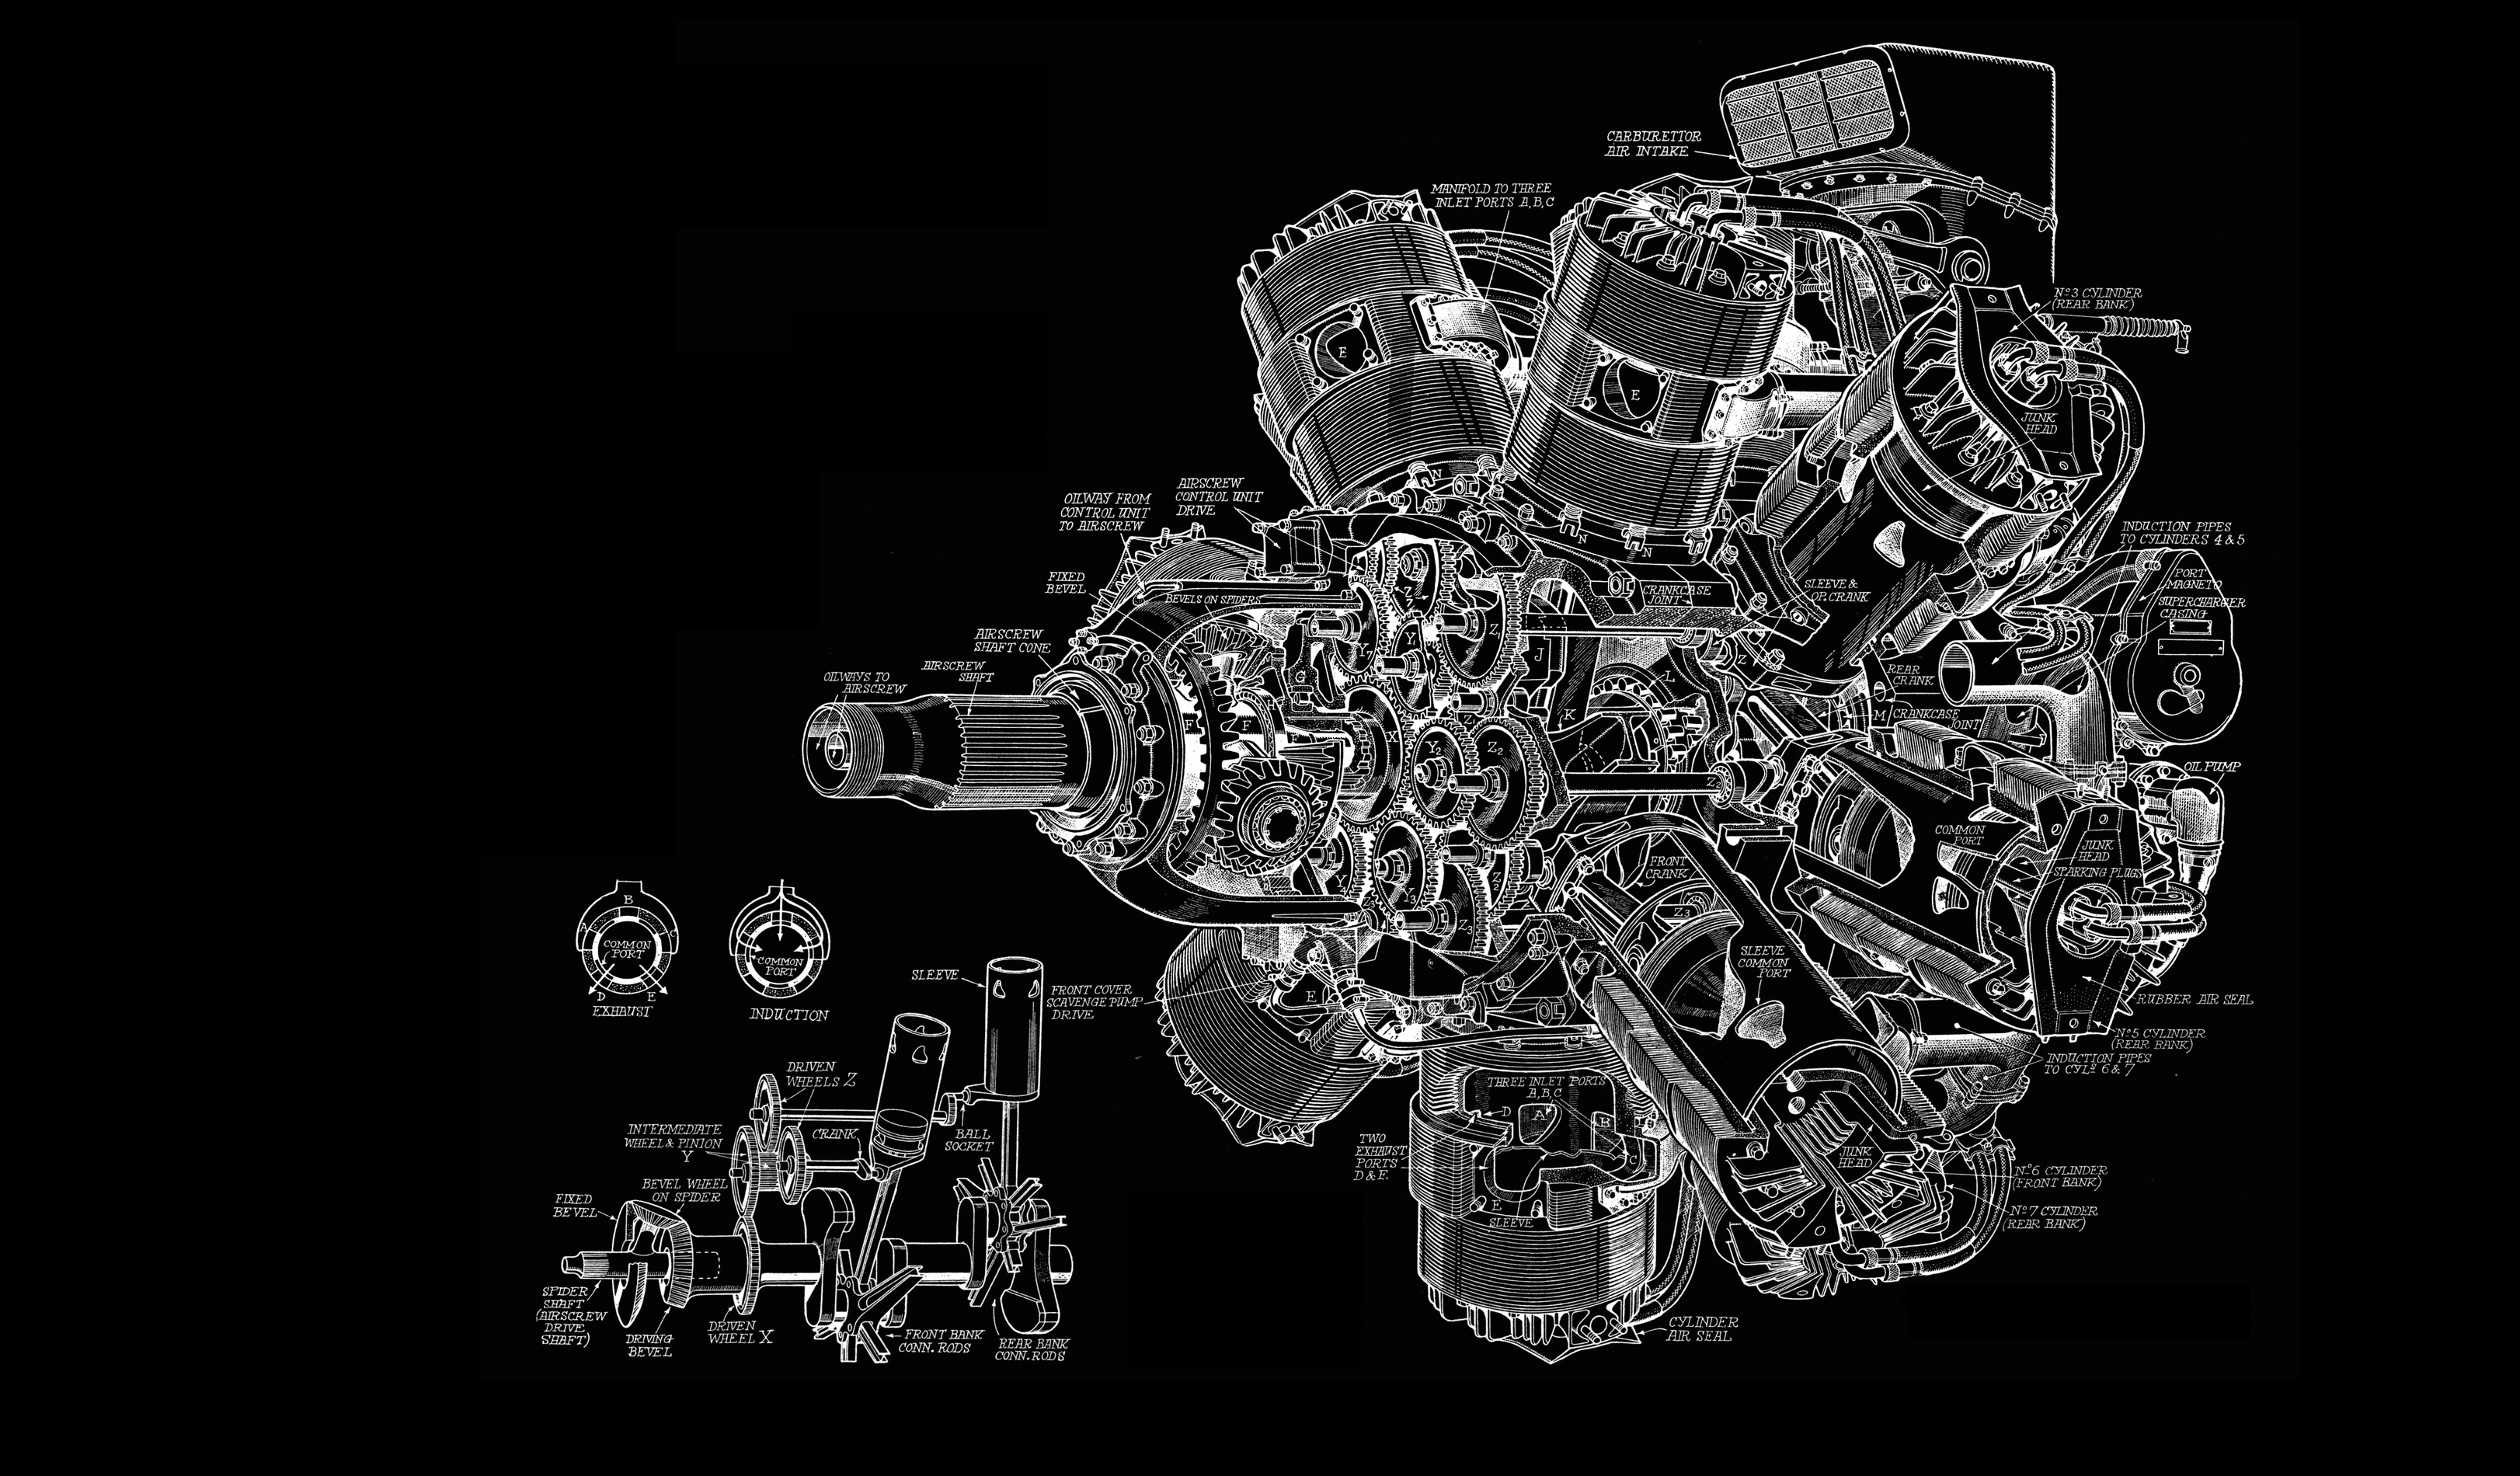  Engineering  wallpaper    Download free awesome full HD  